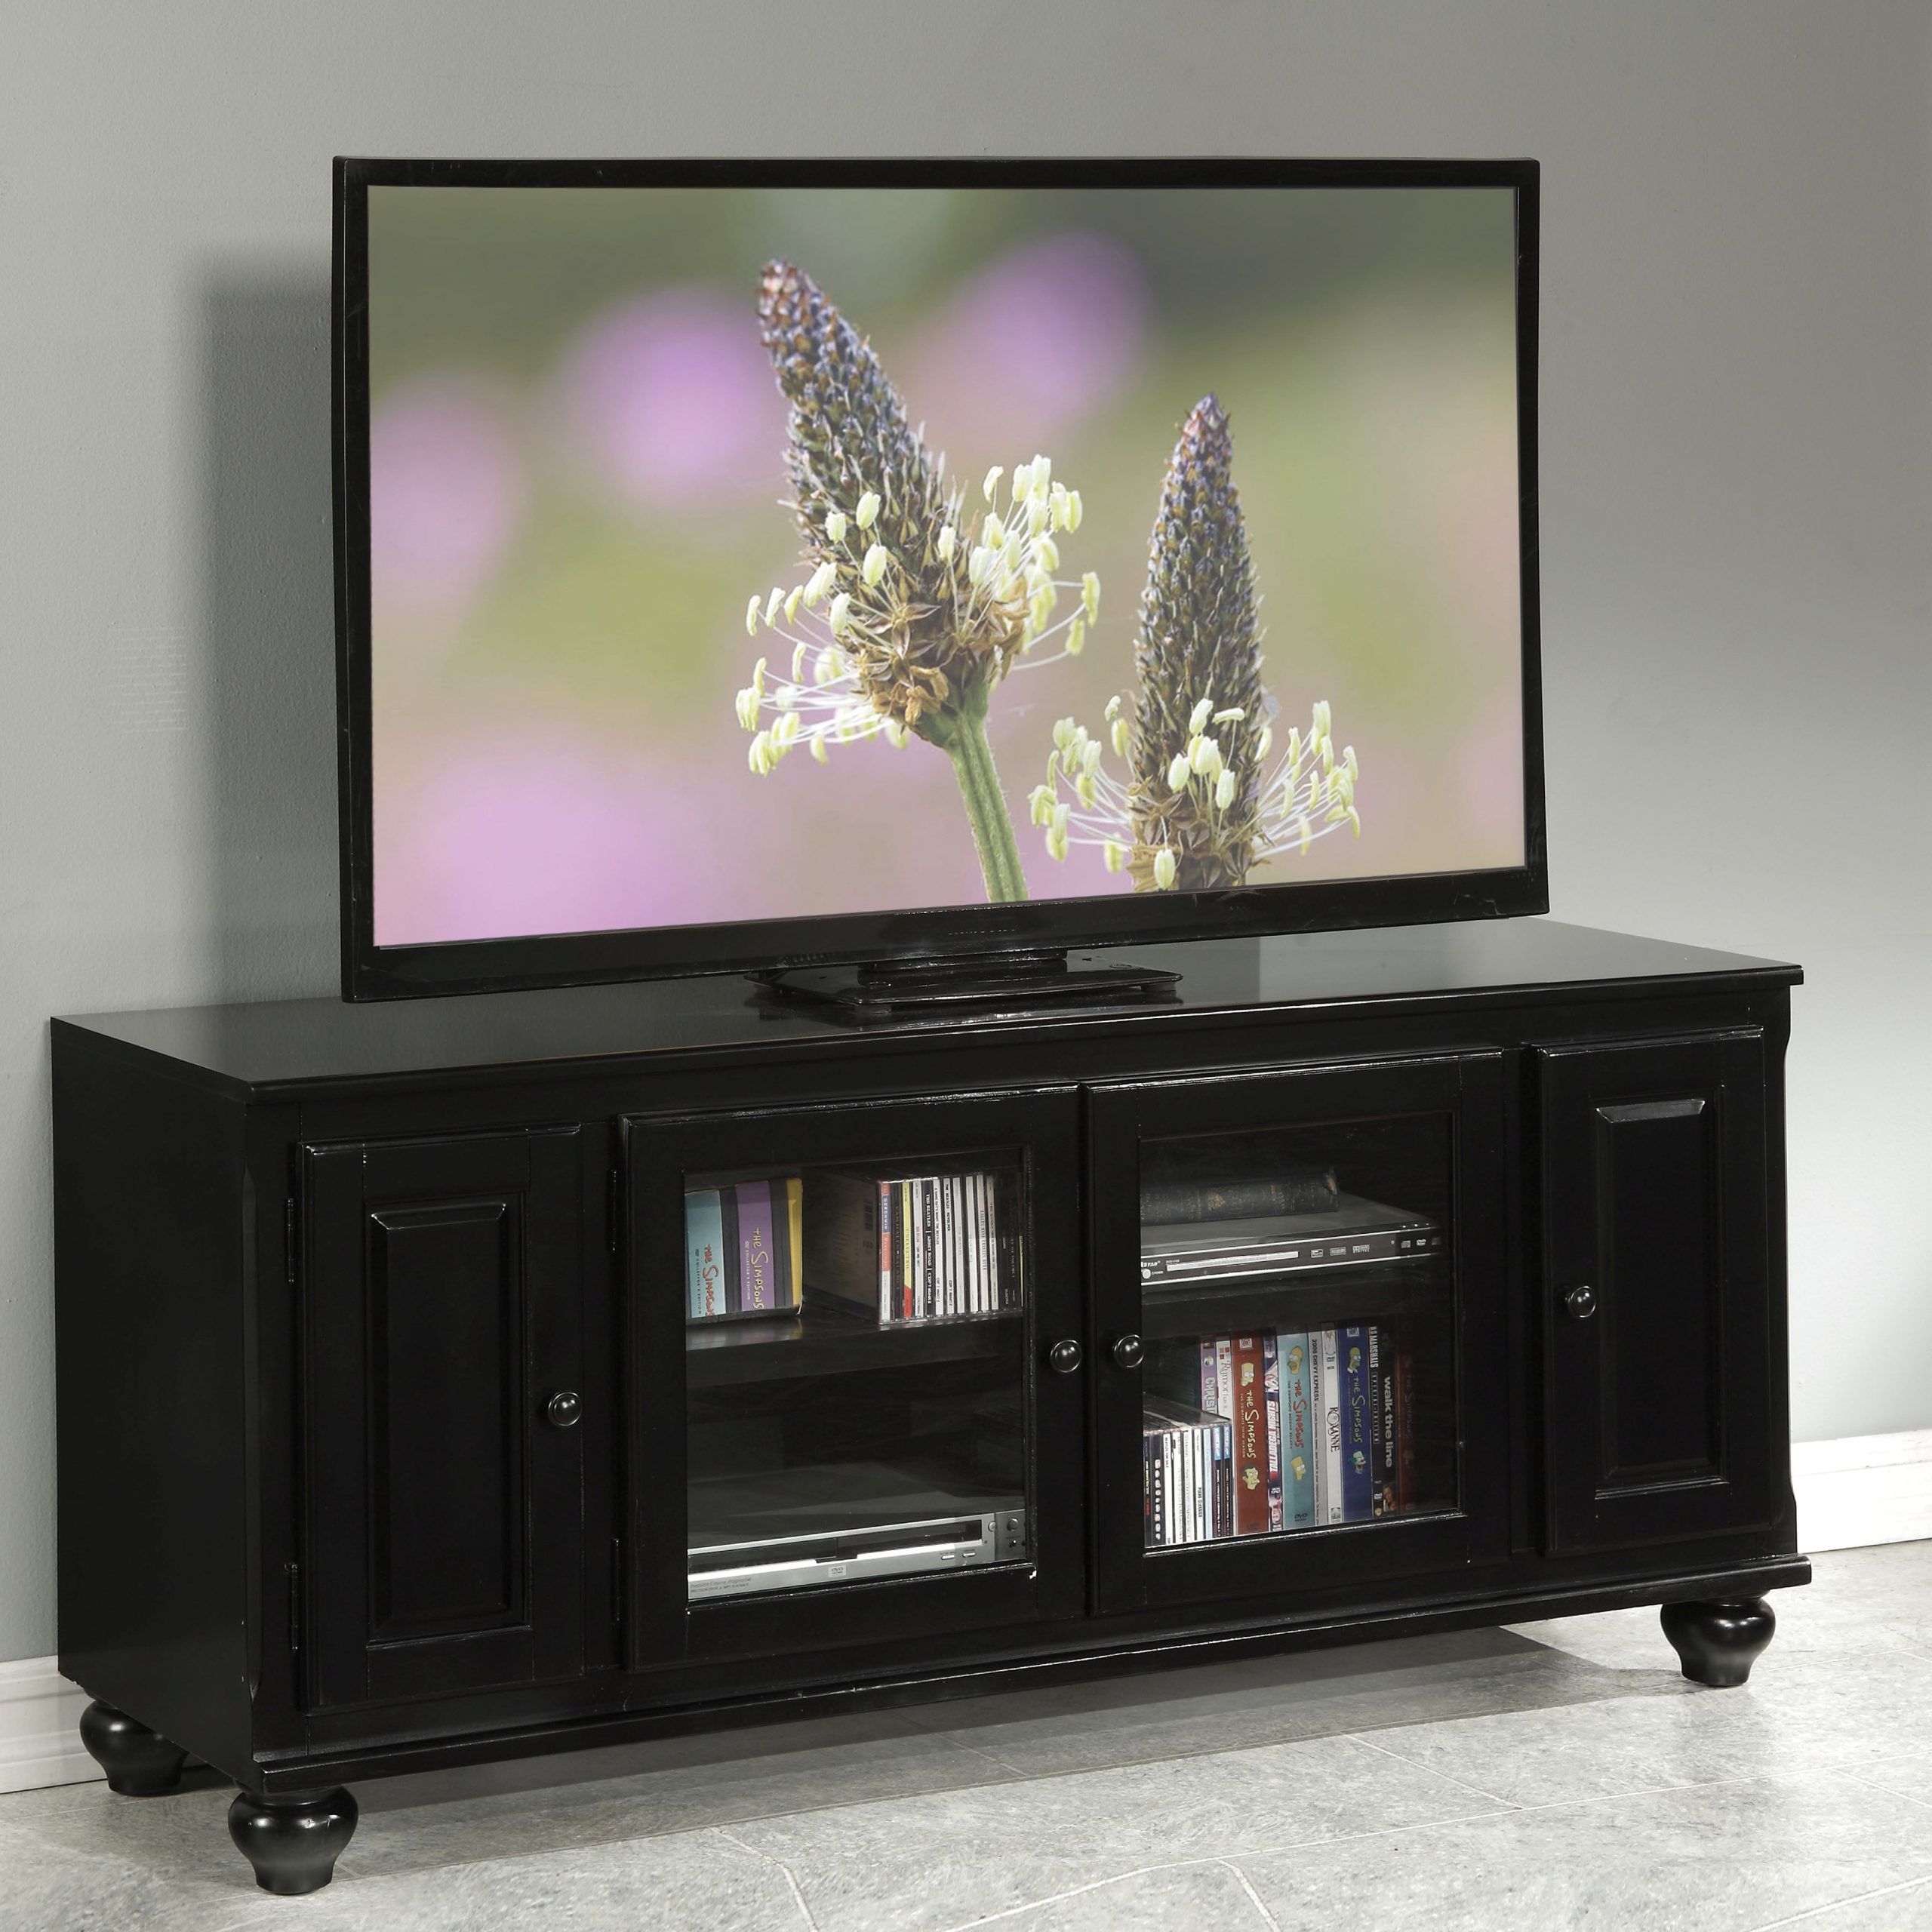 Acme Furniture Ferla Black Tv Stand | The Classy Home Inside Classy Tv Stands (View 1 of 15)